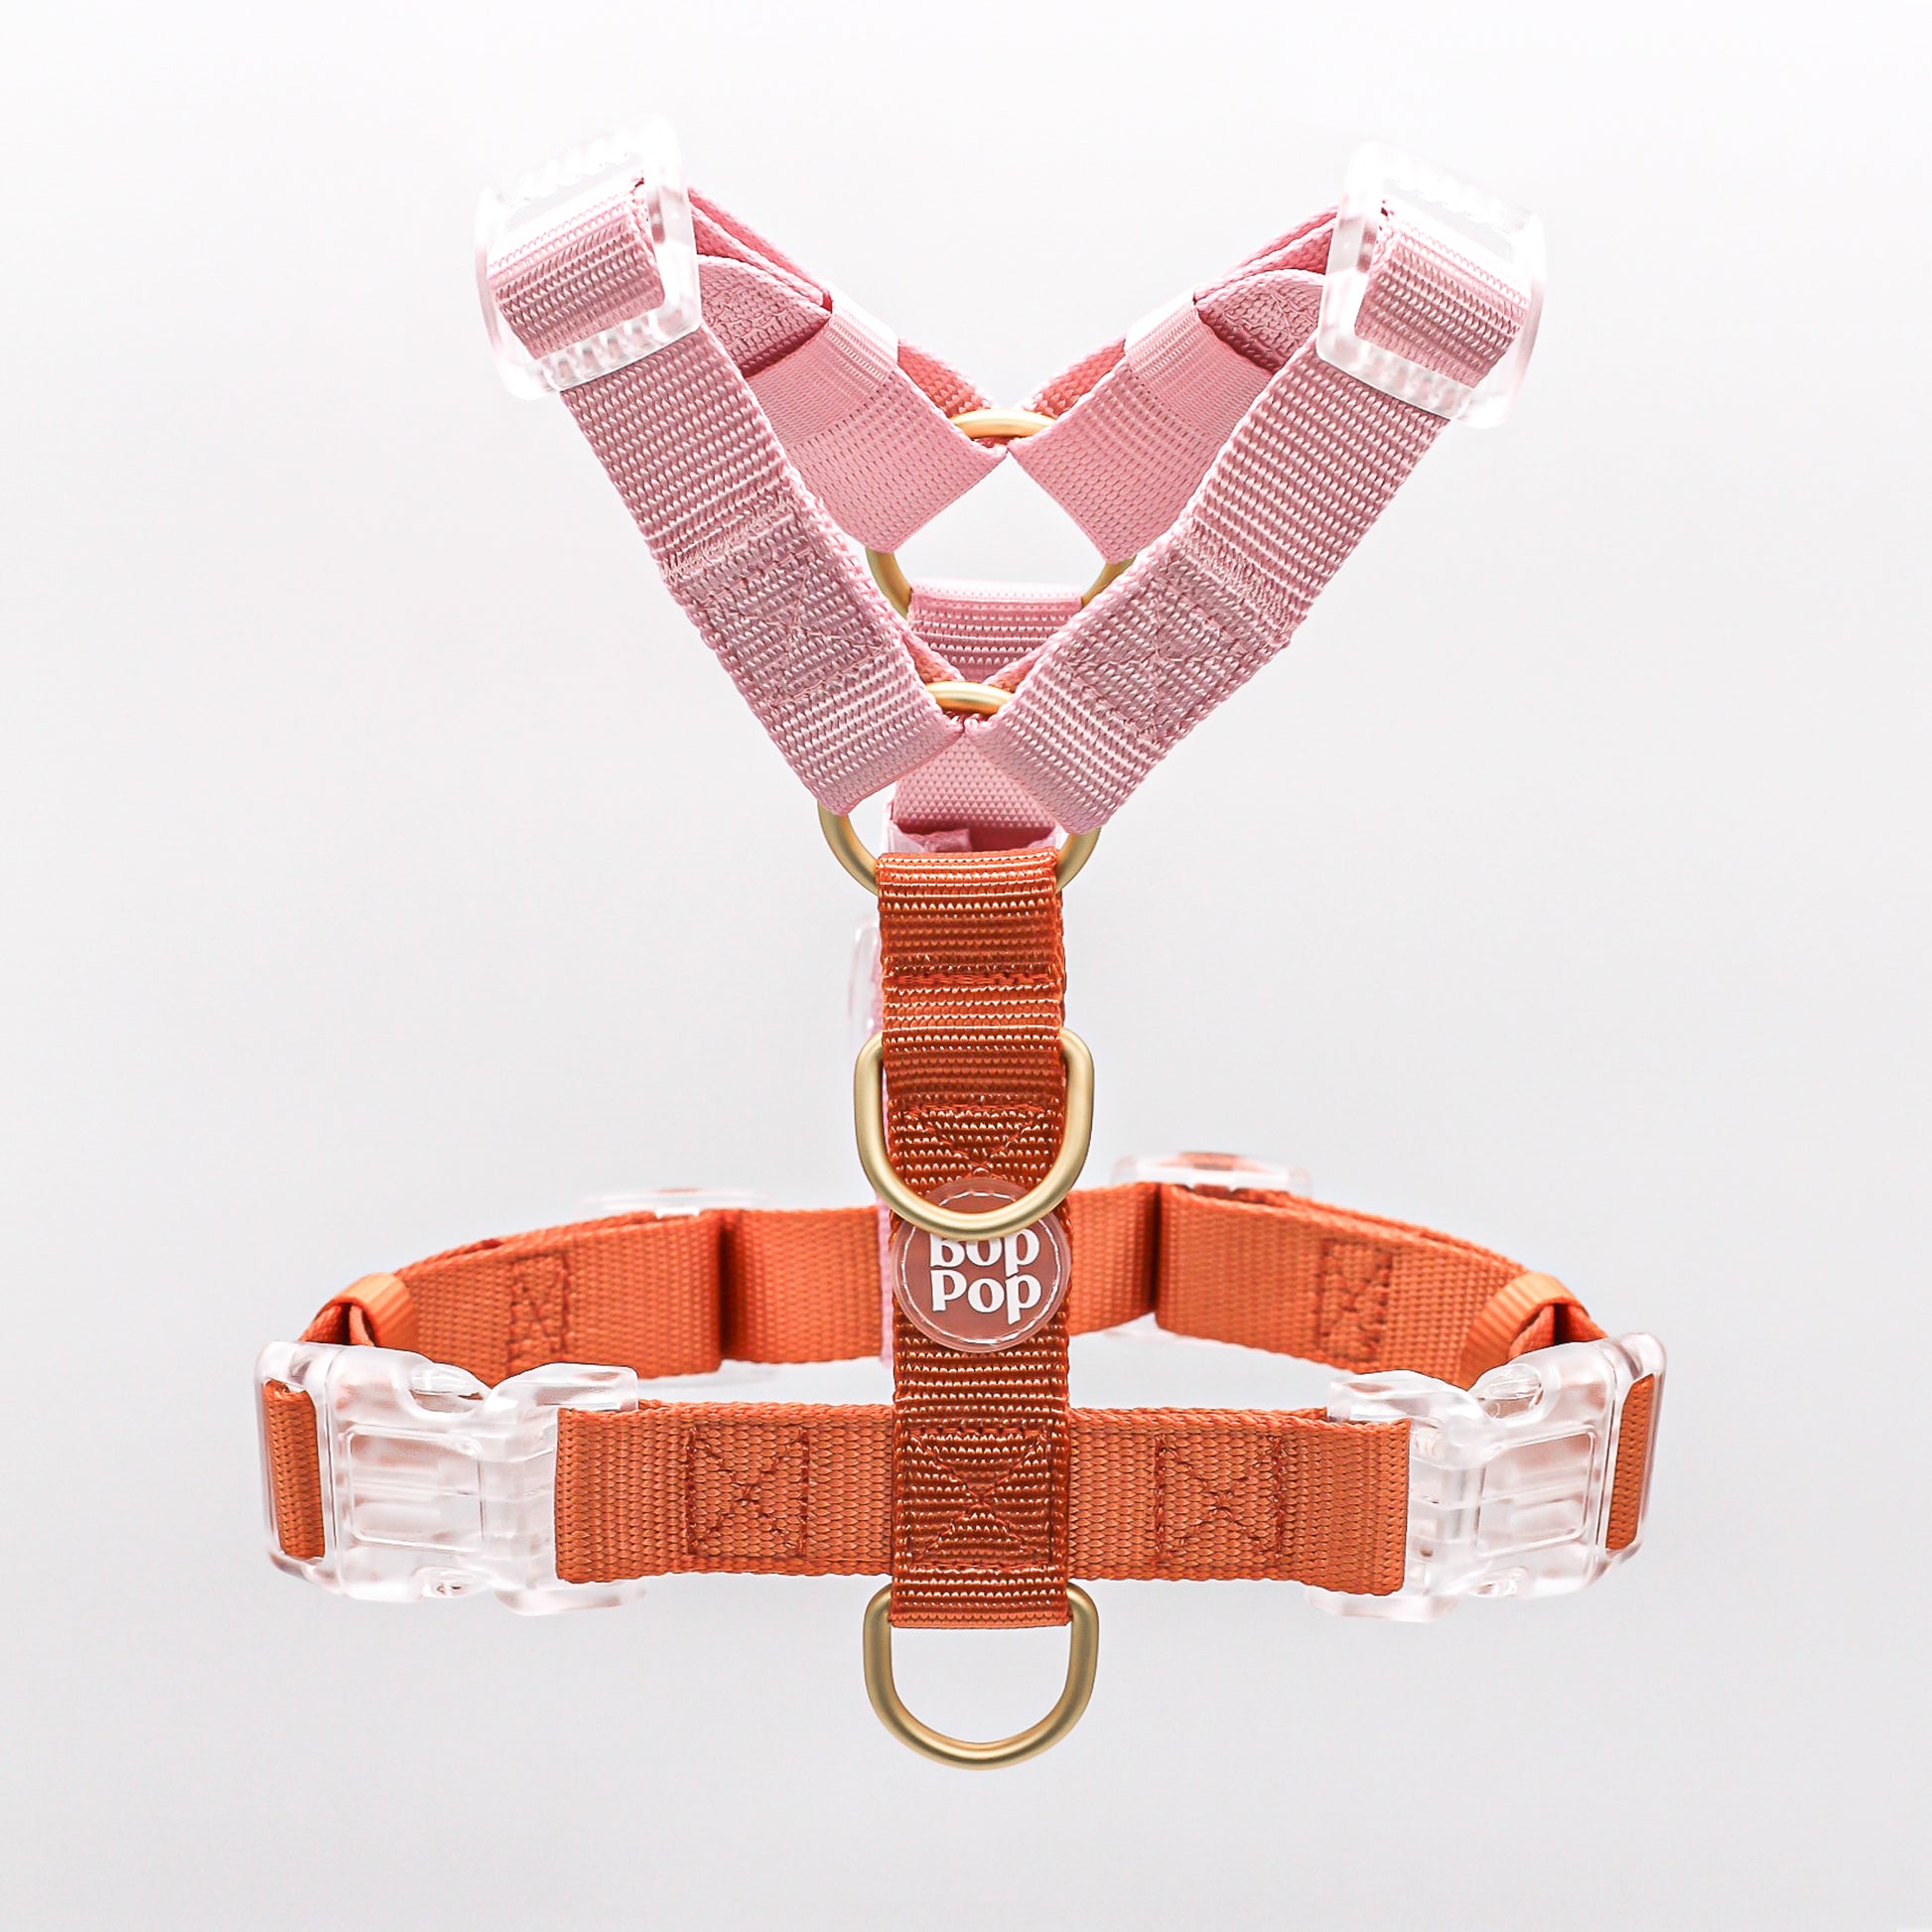 2 Color Contrast Dual Dusty Pink Orange Classic Dog Nylon Strap Harness with Gold Hardware Clear Buckles Pet Accessory Bop Pop Pets Details Logo tag